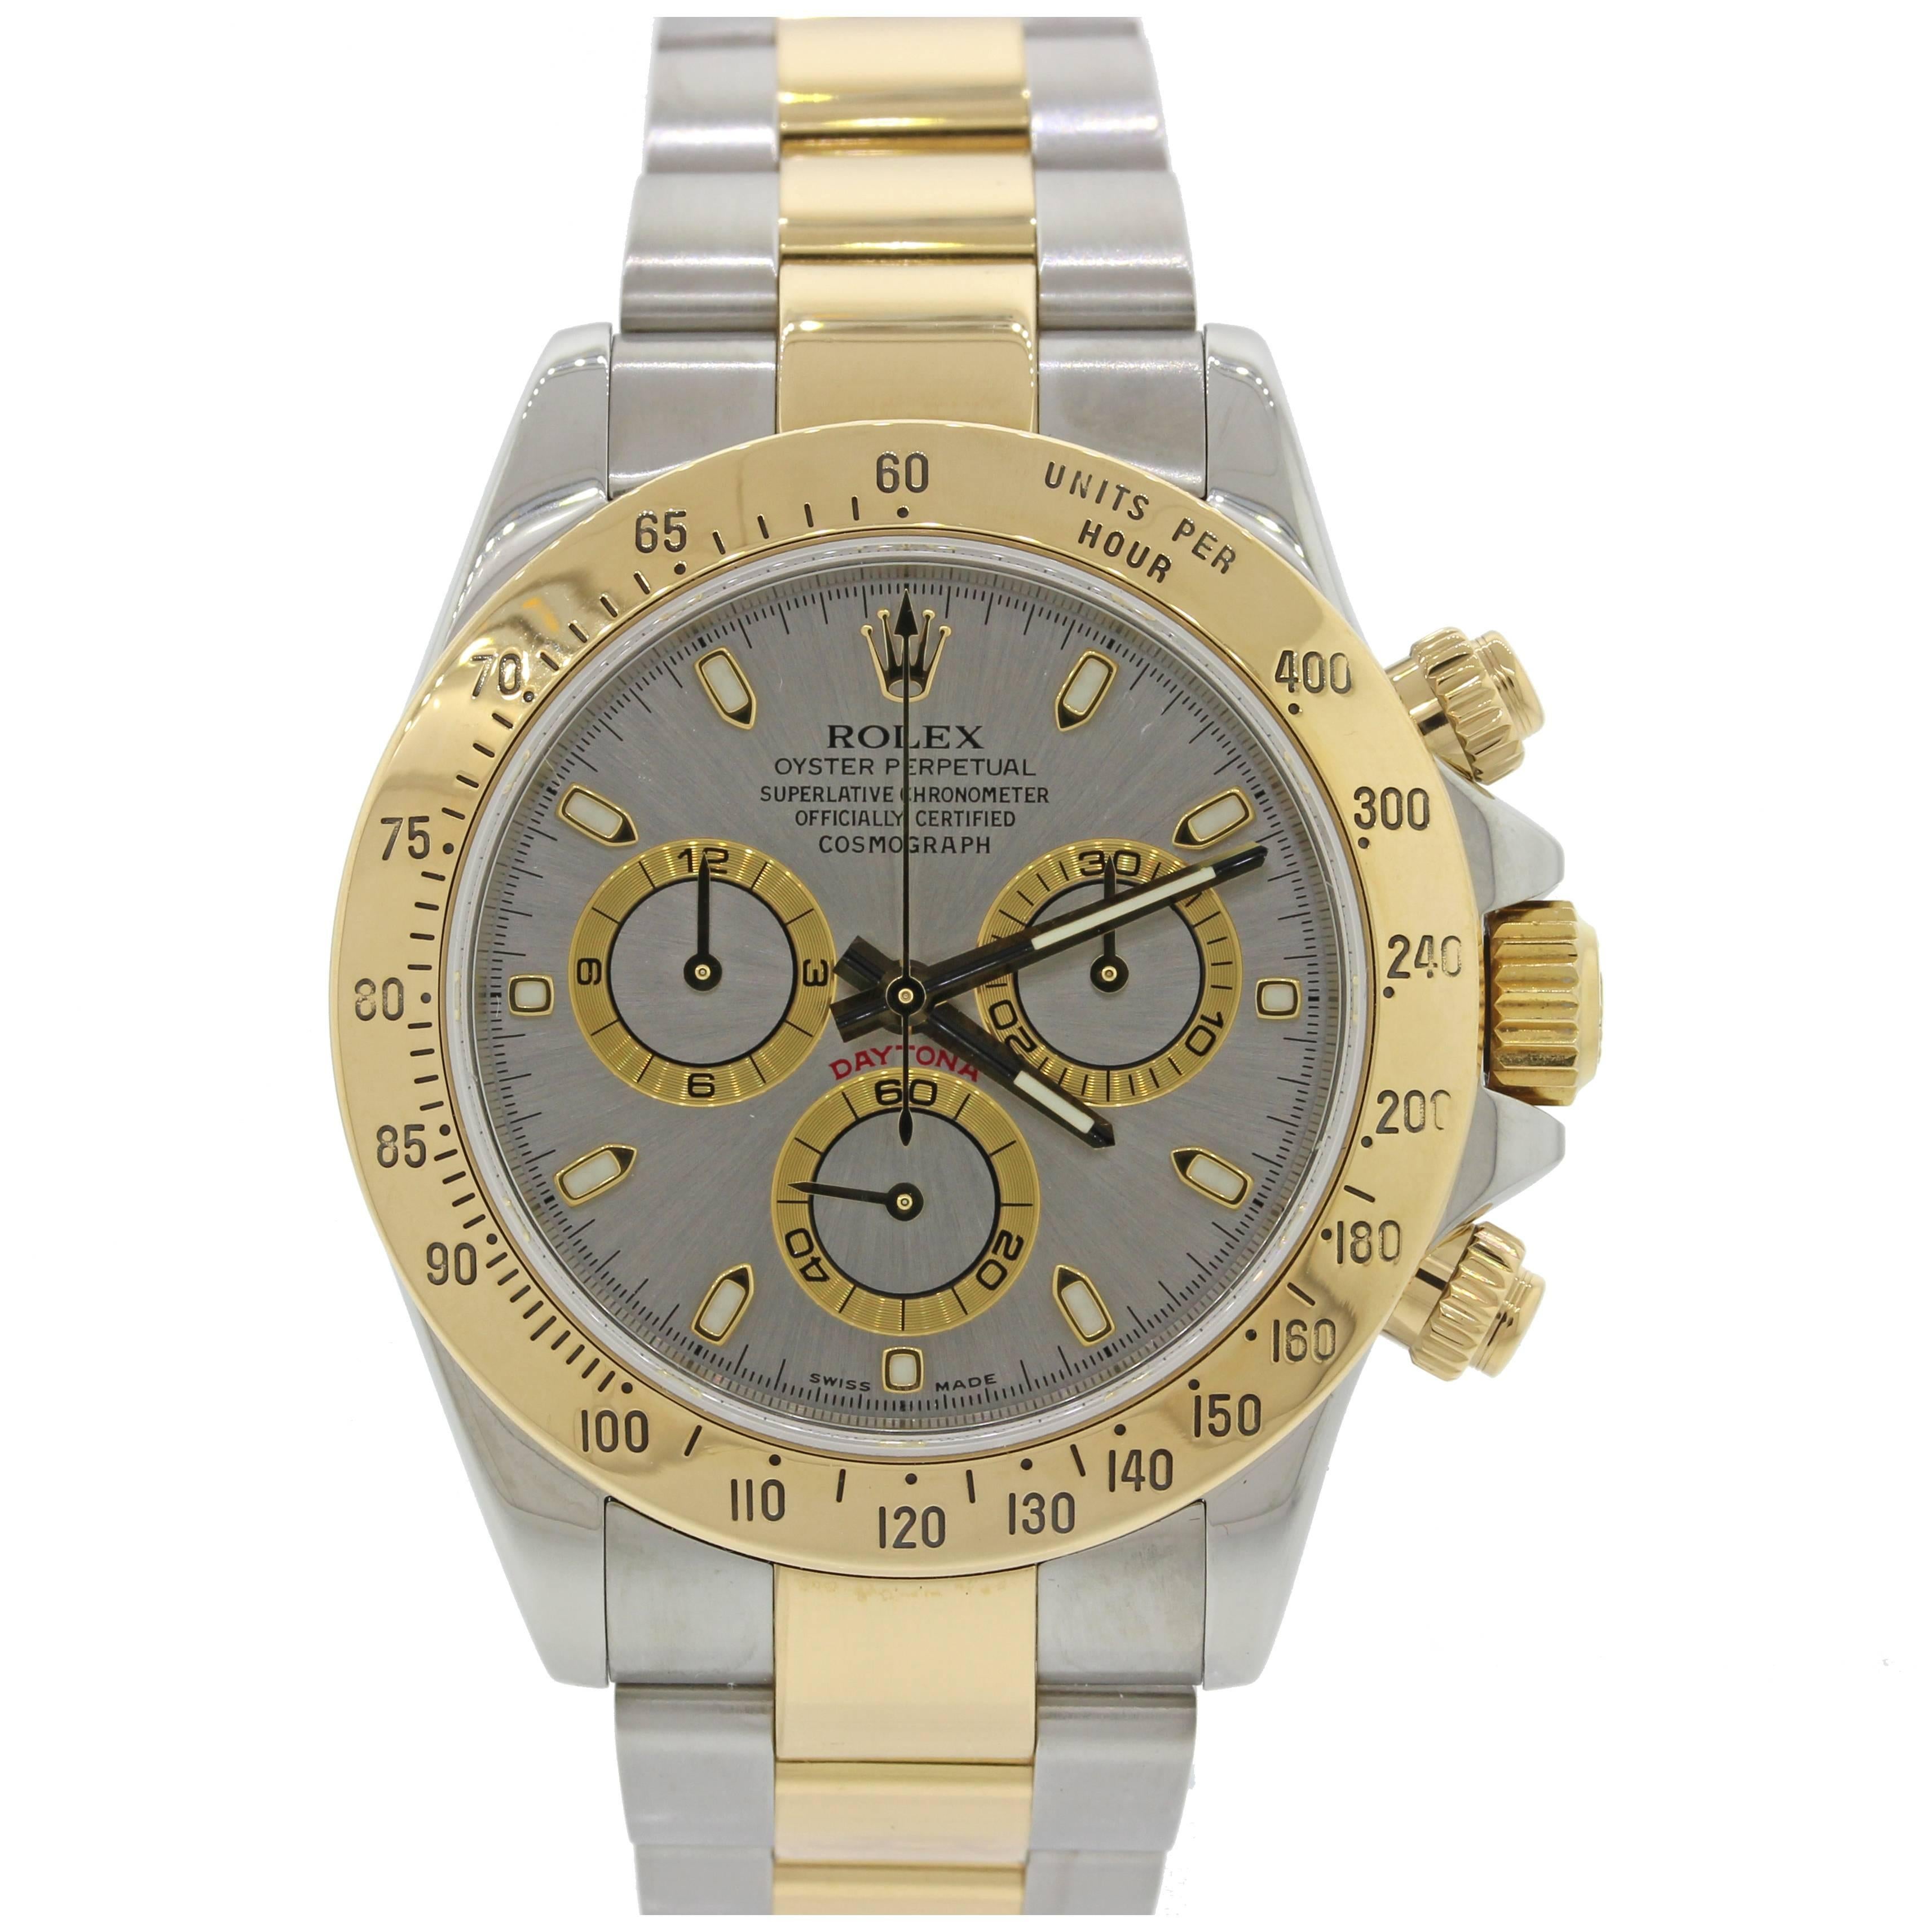 Rolex Daytona Cosmograph 116523 Silver Steel Gold Two Tone Watch Box Papers